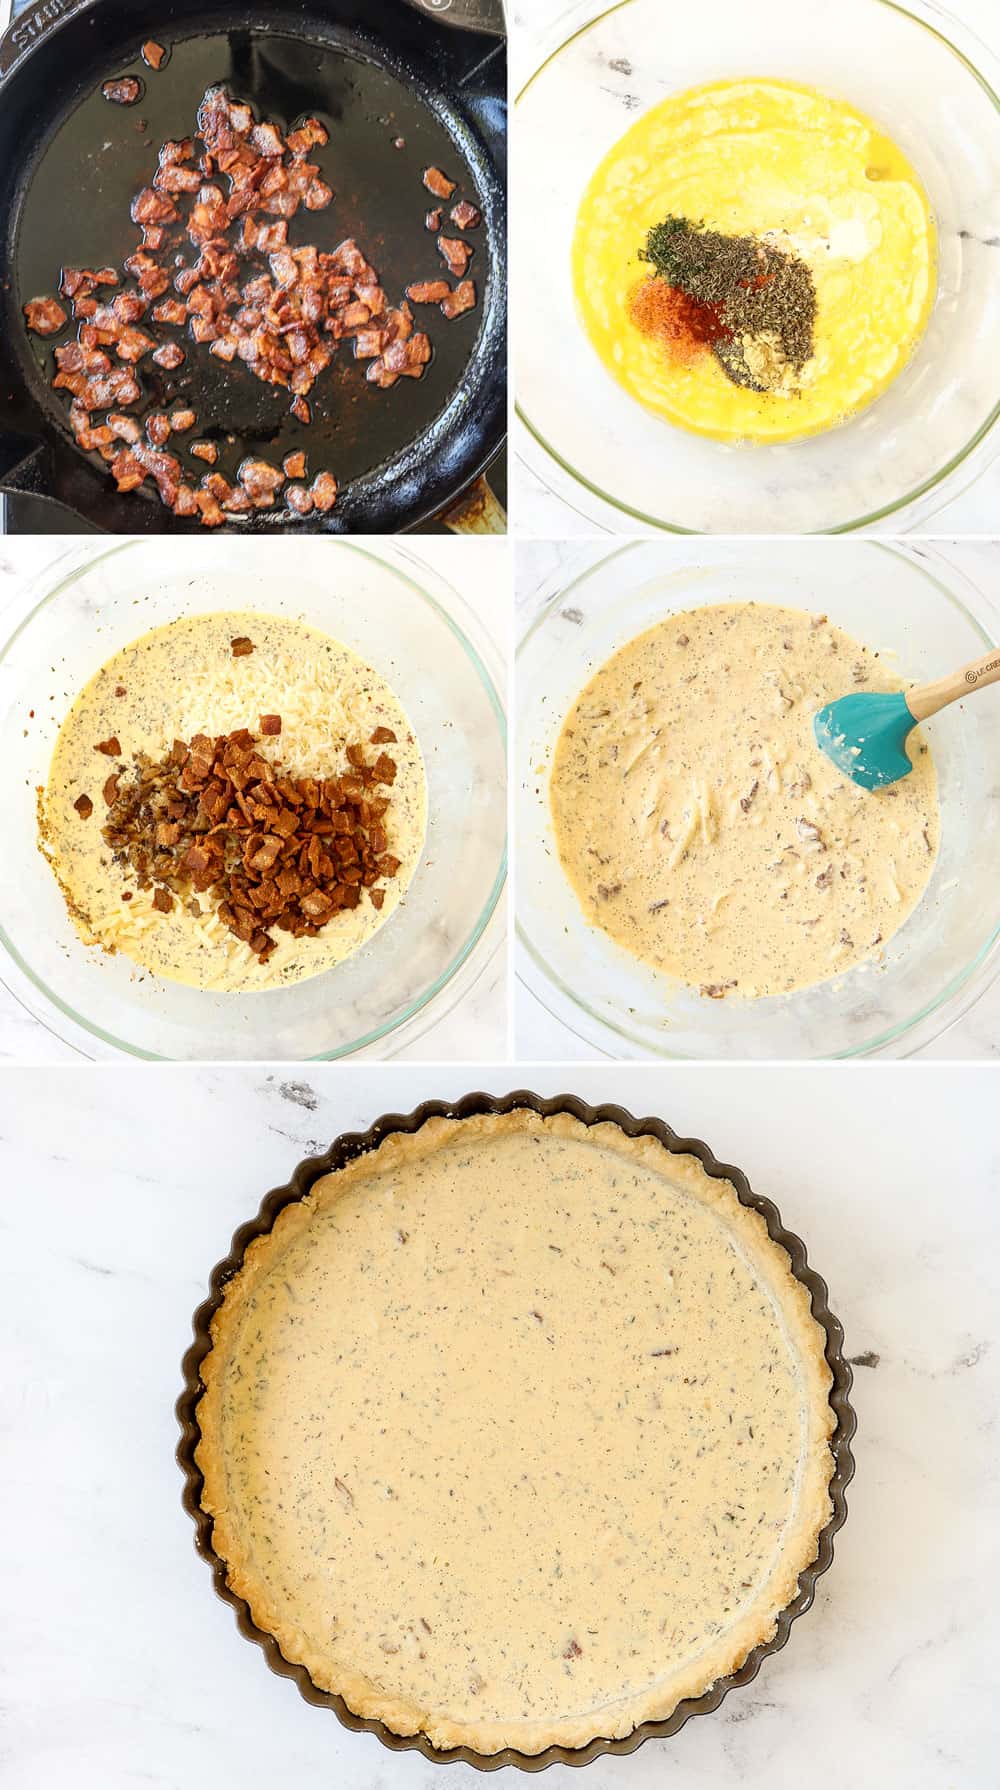 a collage showing how to make quiche Lorraine by 1) cooking bacon, 2) beating eggs and spices in a bowl, 3) adding bacon, onions and Gruyere to filling, pouring the filling into a quiche pan